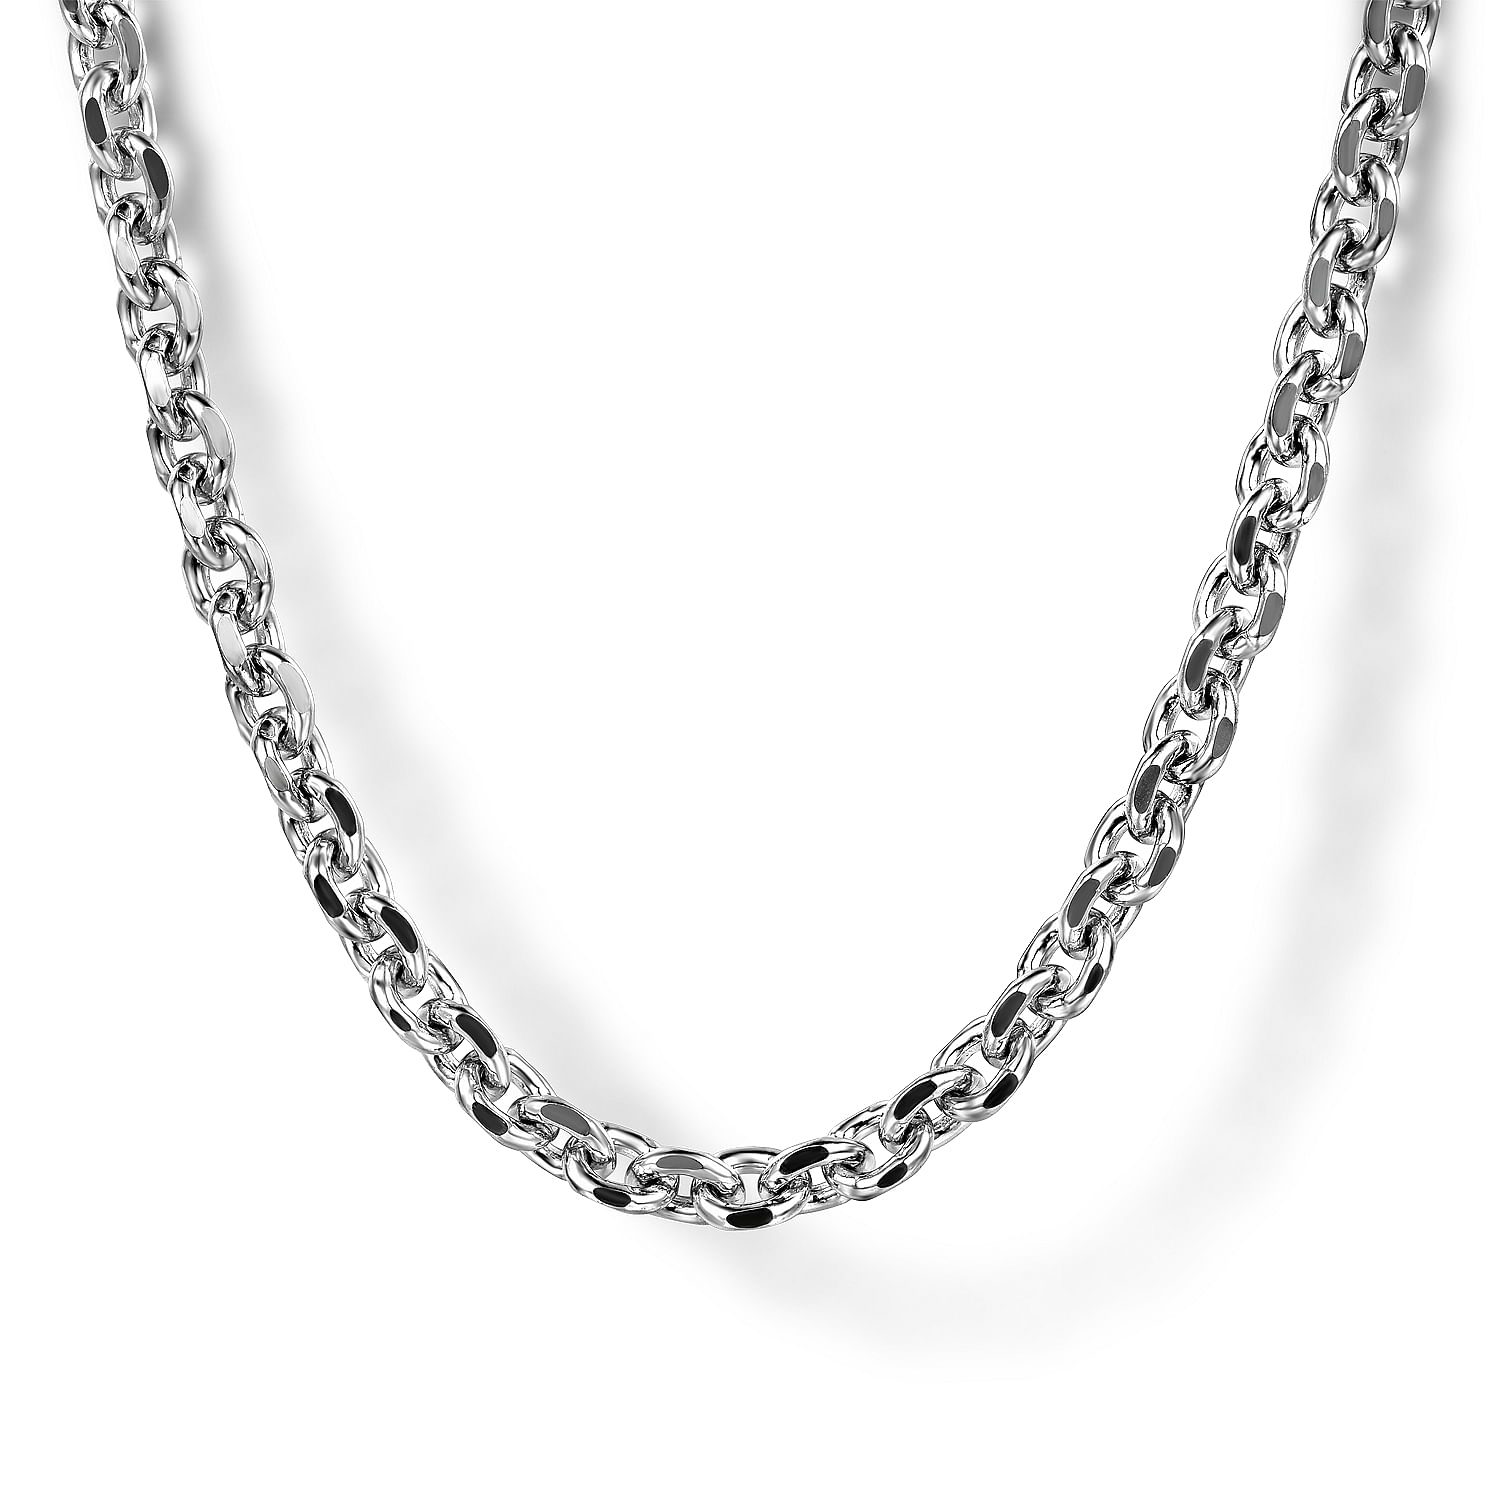 22 Inch 925 Sterling Silver Mens Link Chain Necklace 